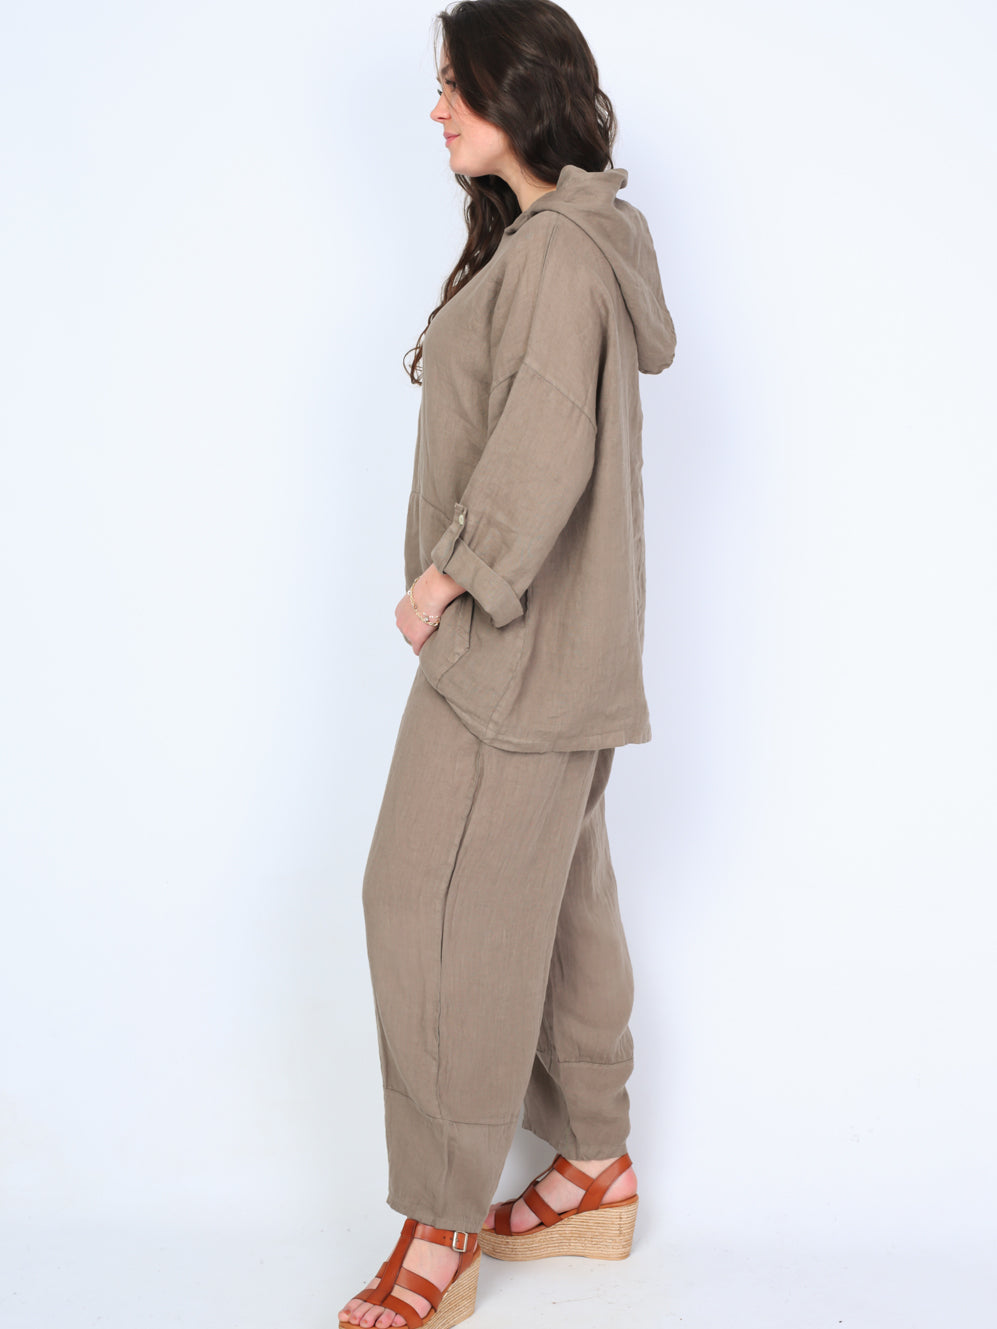 Krone 1 linen blouse with hood